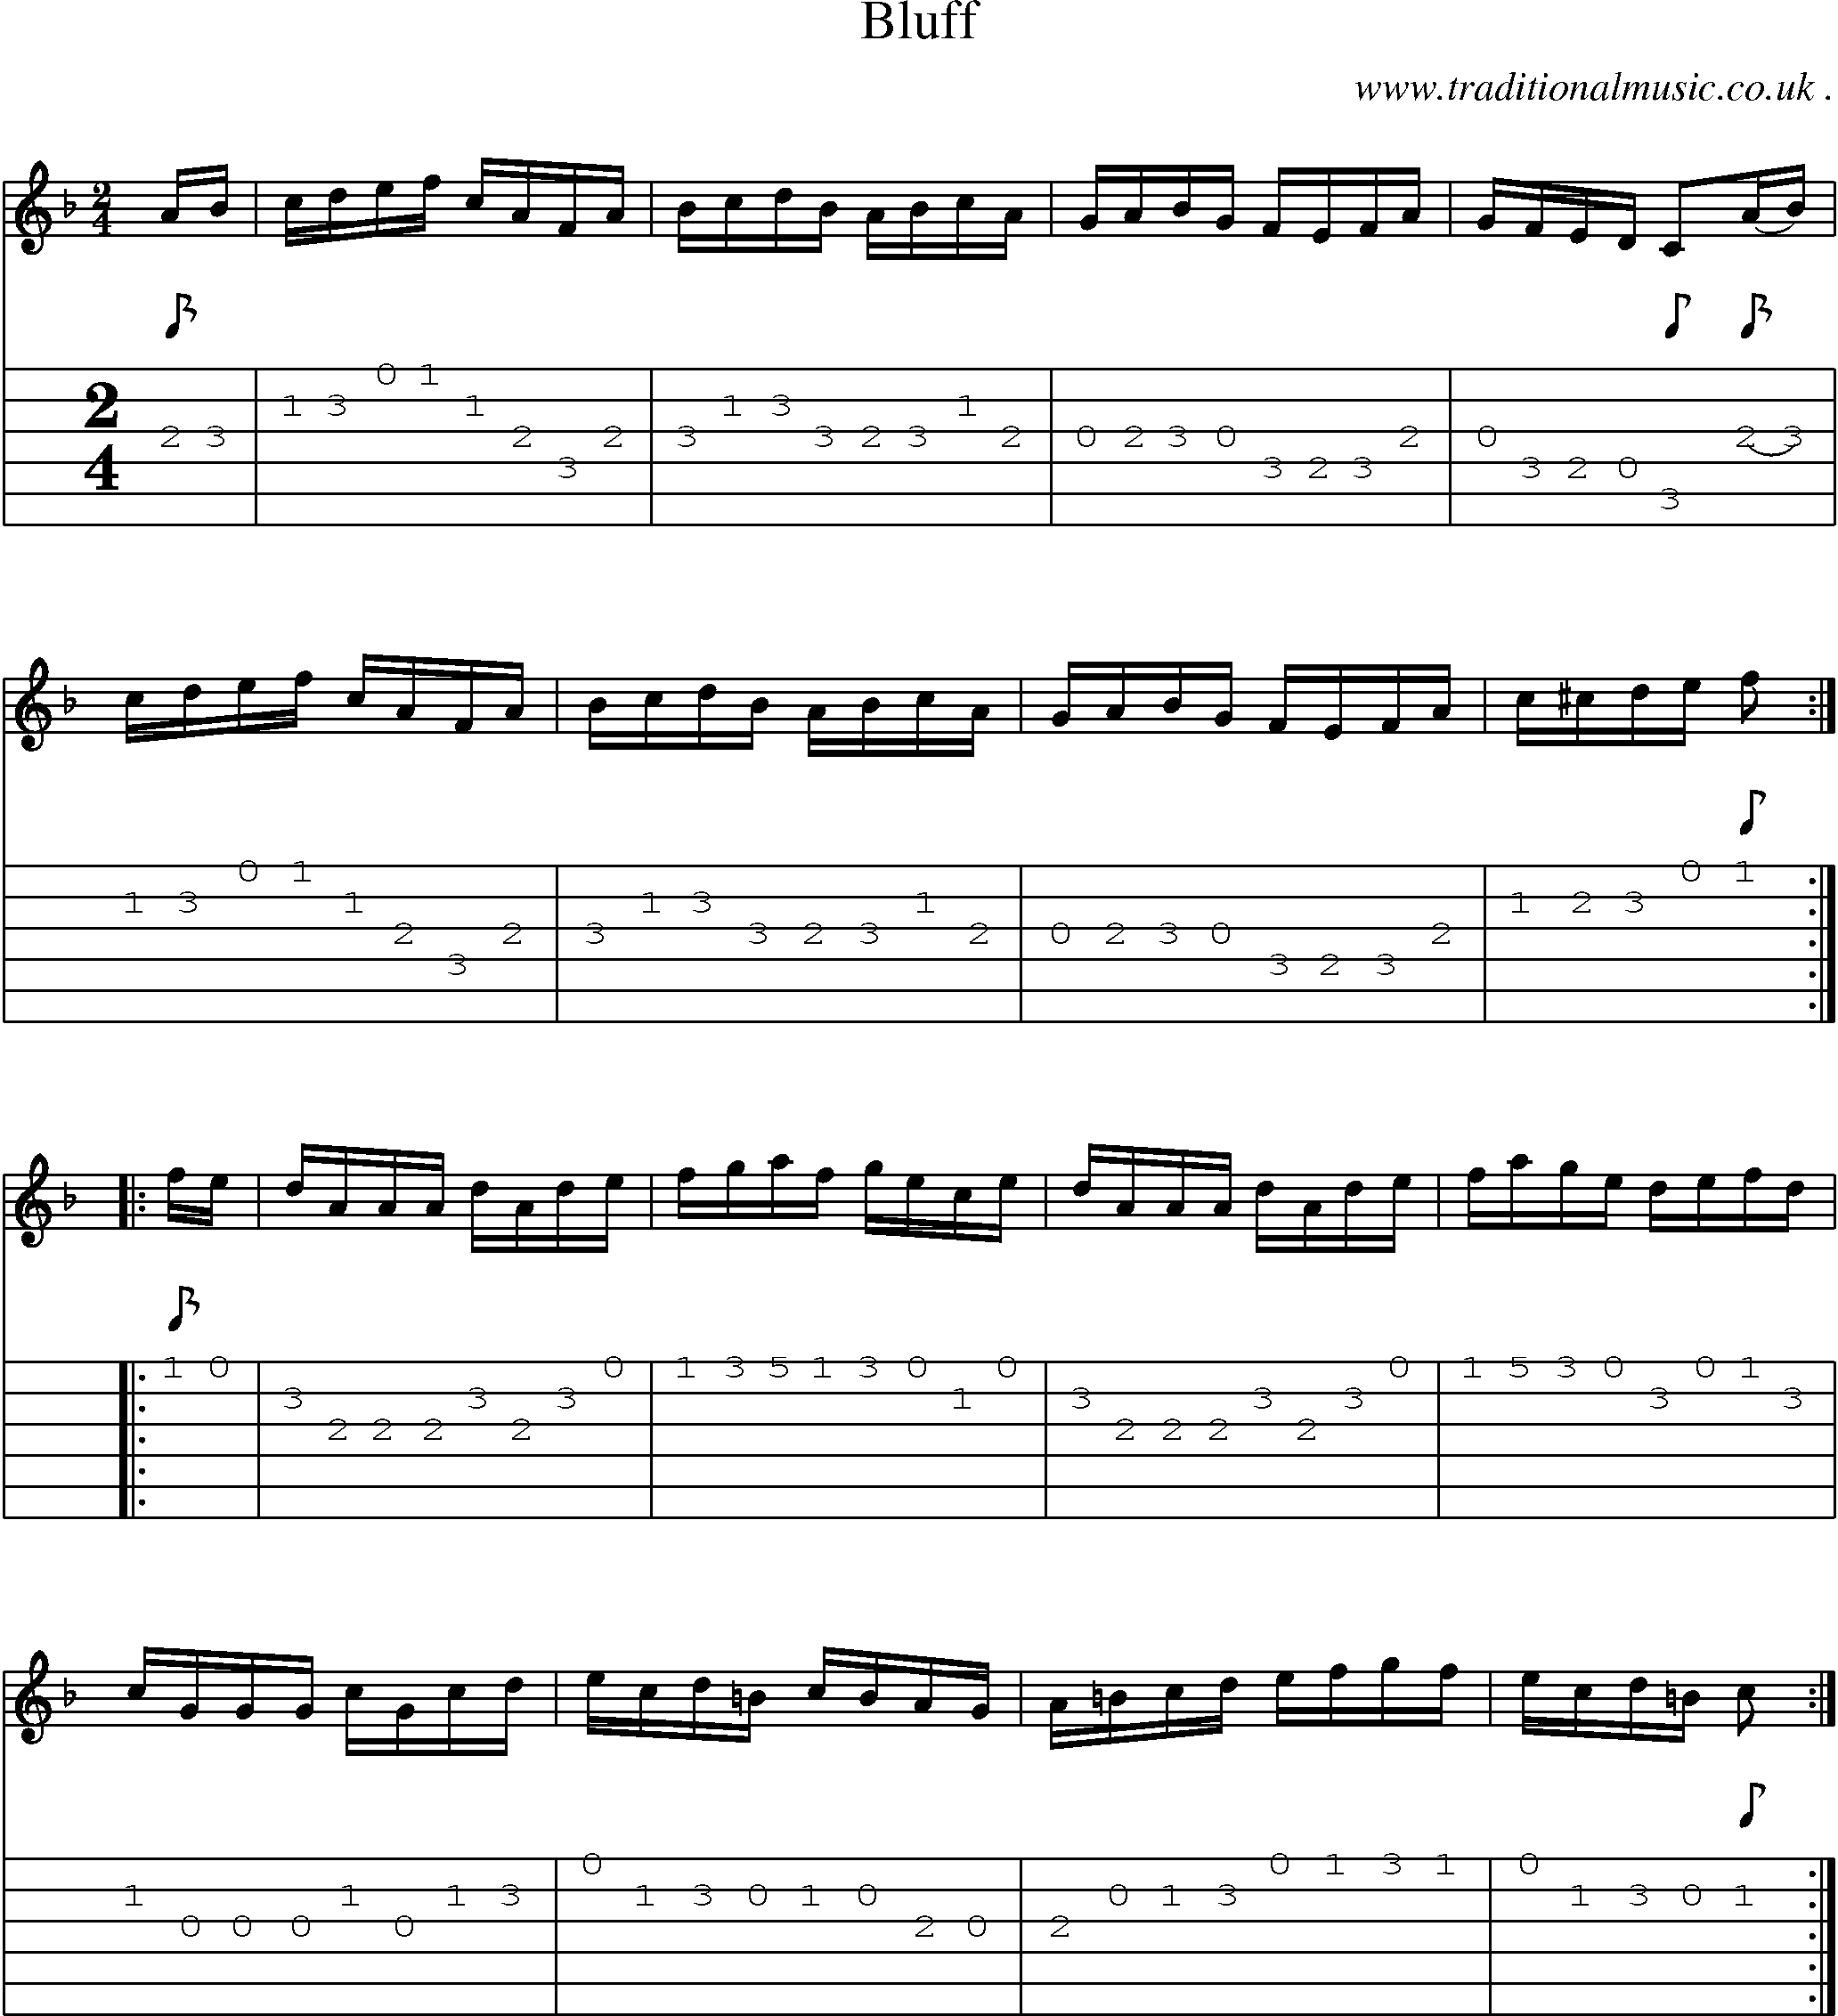 Sheet-Music and Guitar Tabs for Bluff